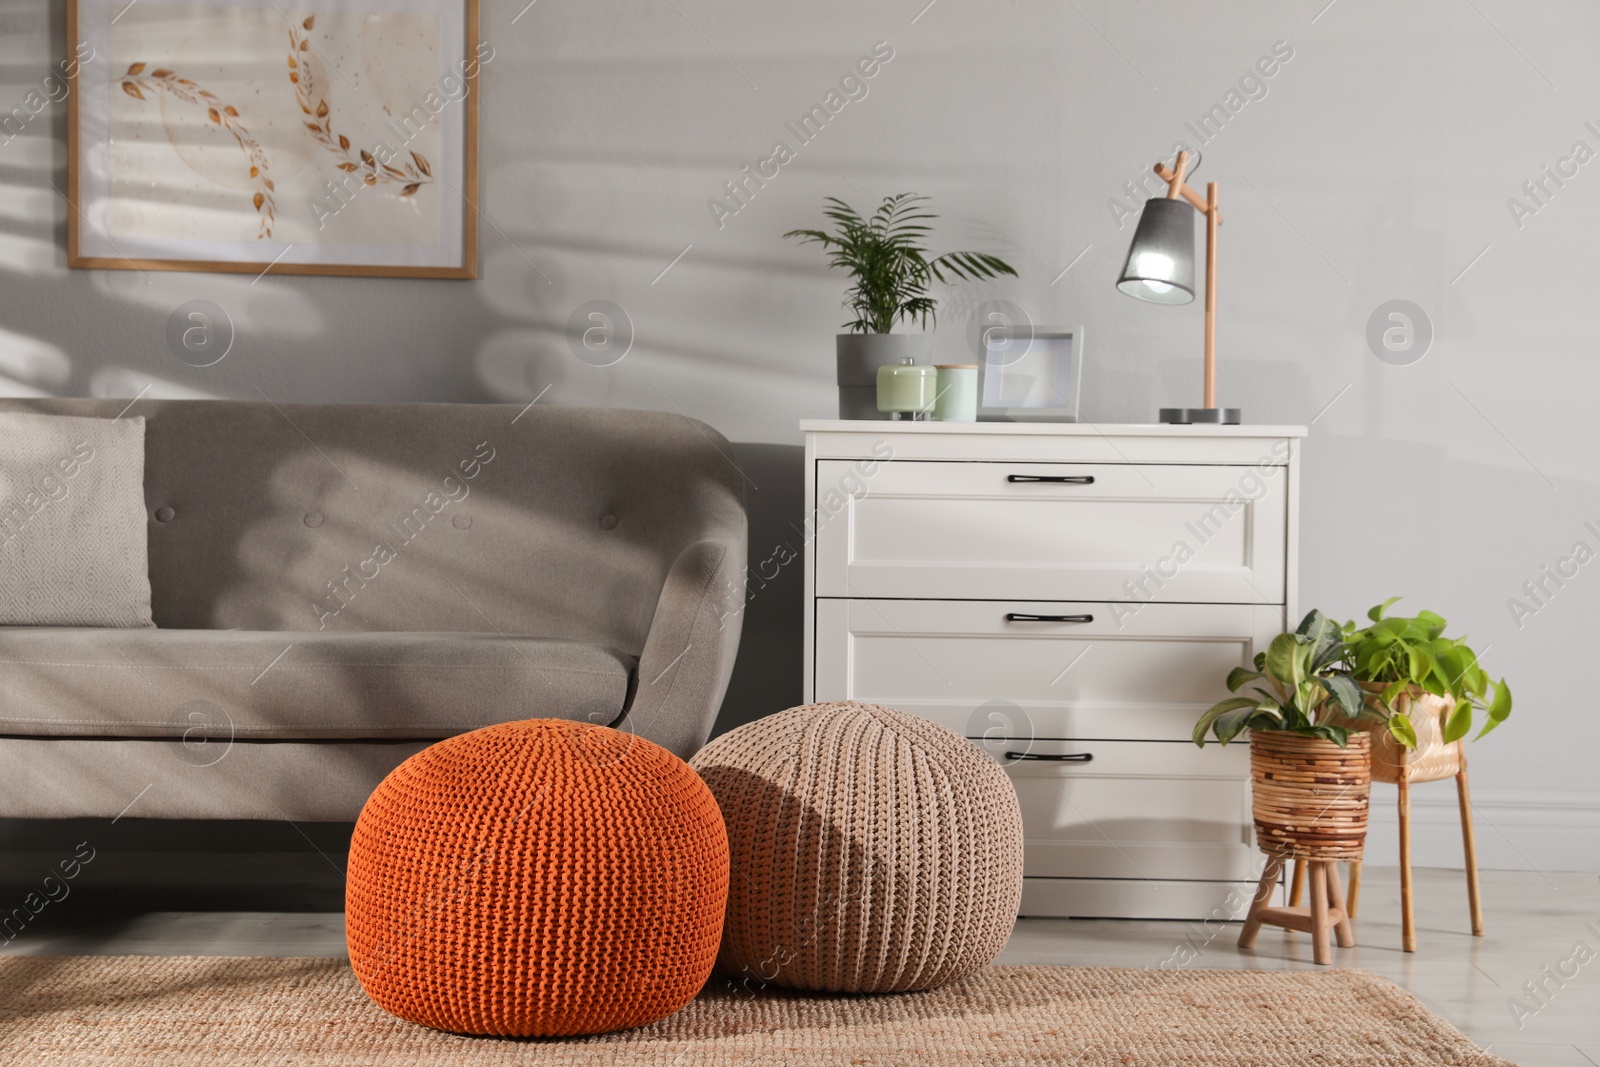 Photo of Stylish knitted poufs and sofa in living room. Home design